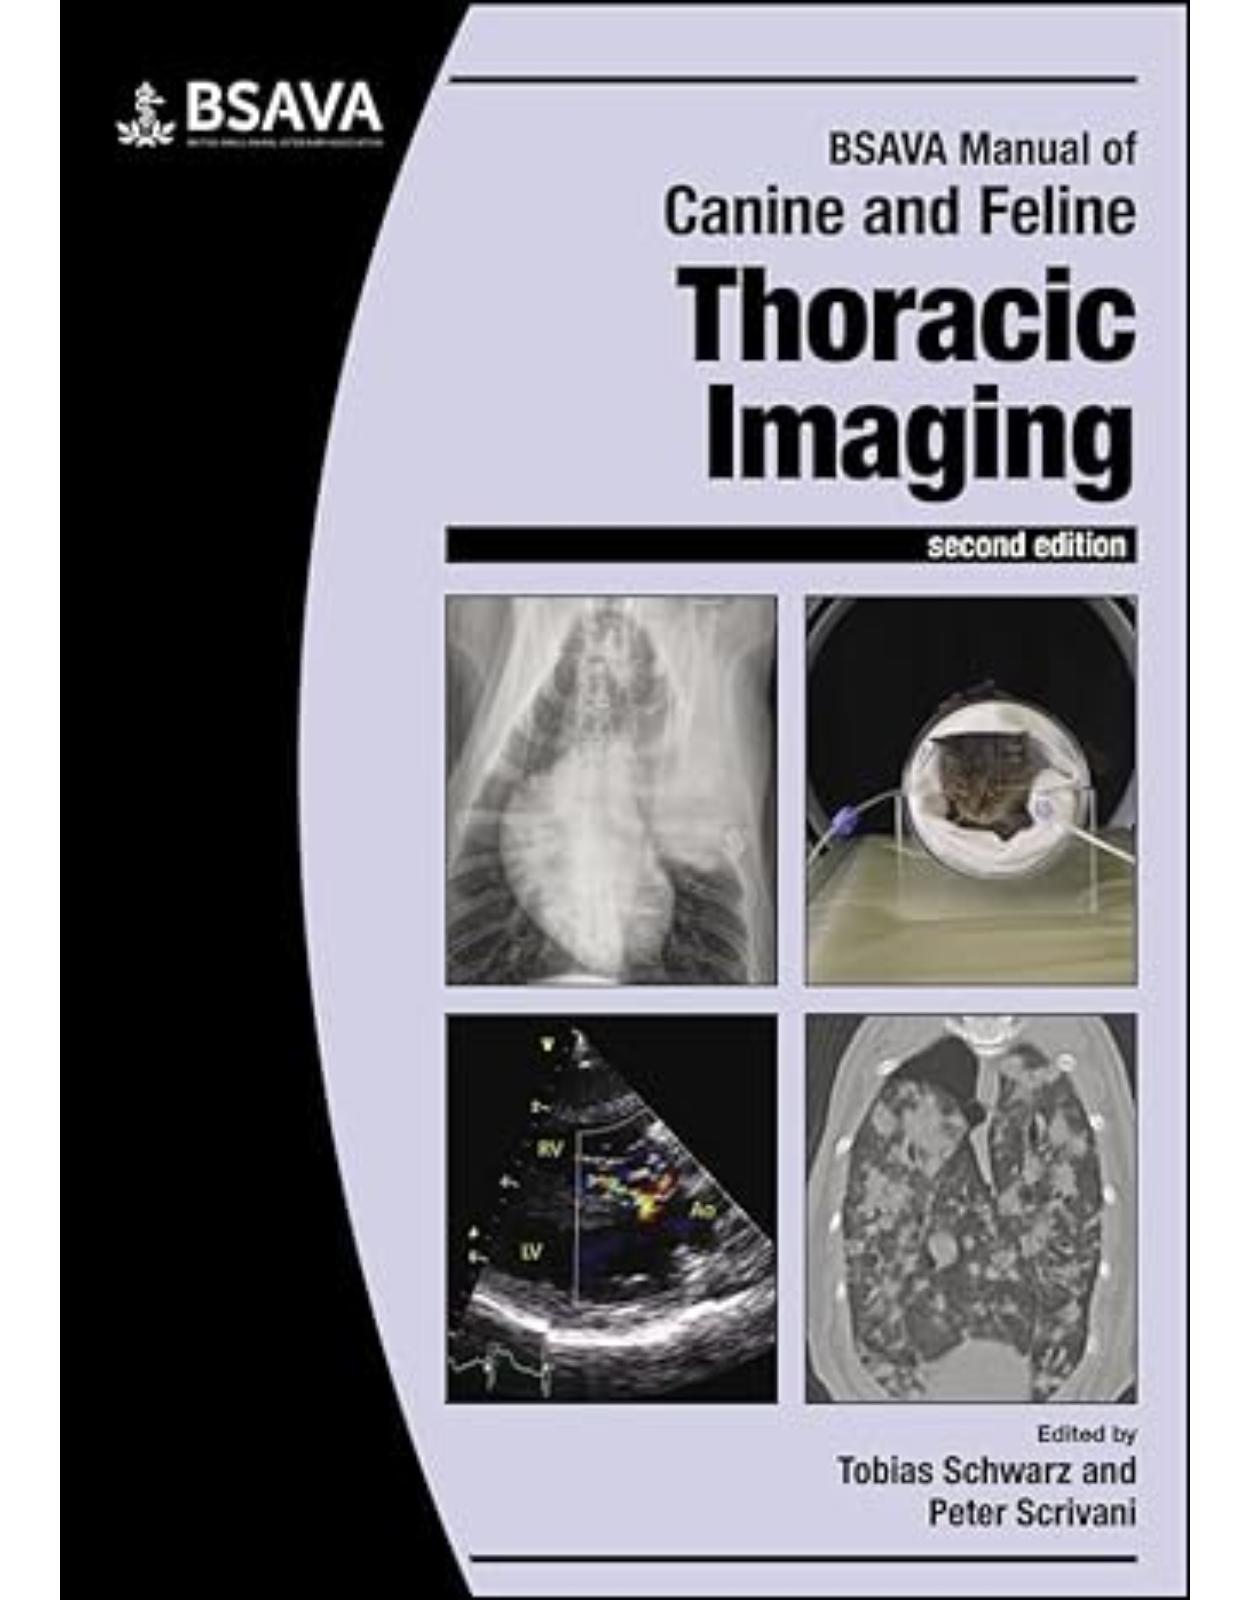 BSAVA Manual of Canine and Feline Thoracic Imaging 2nd edition